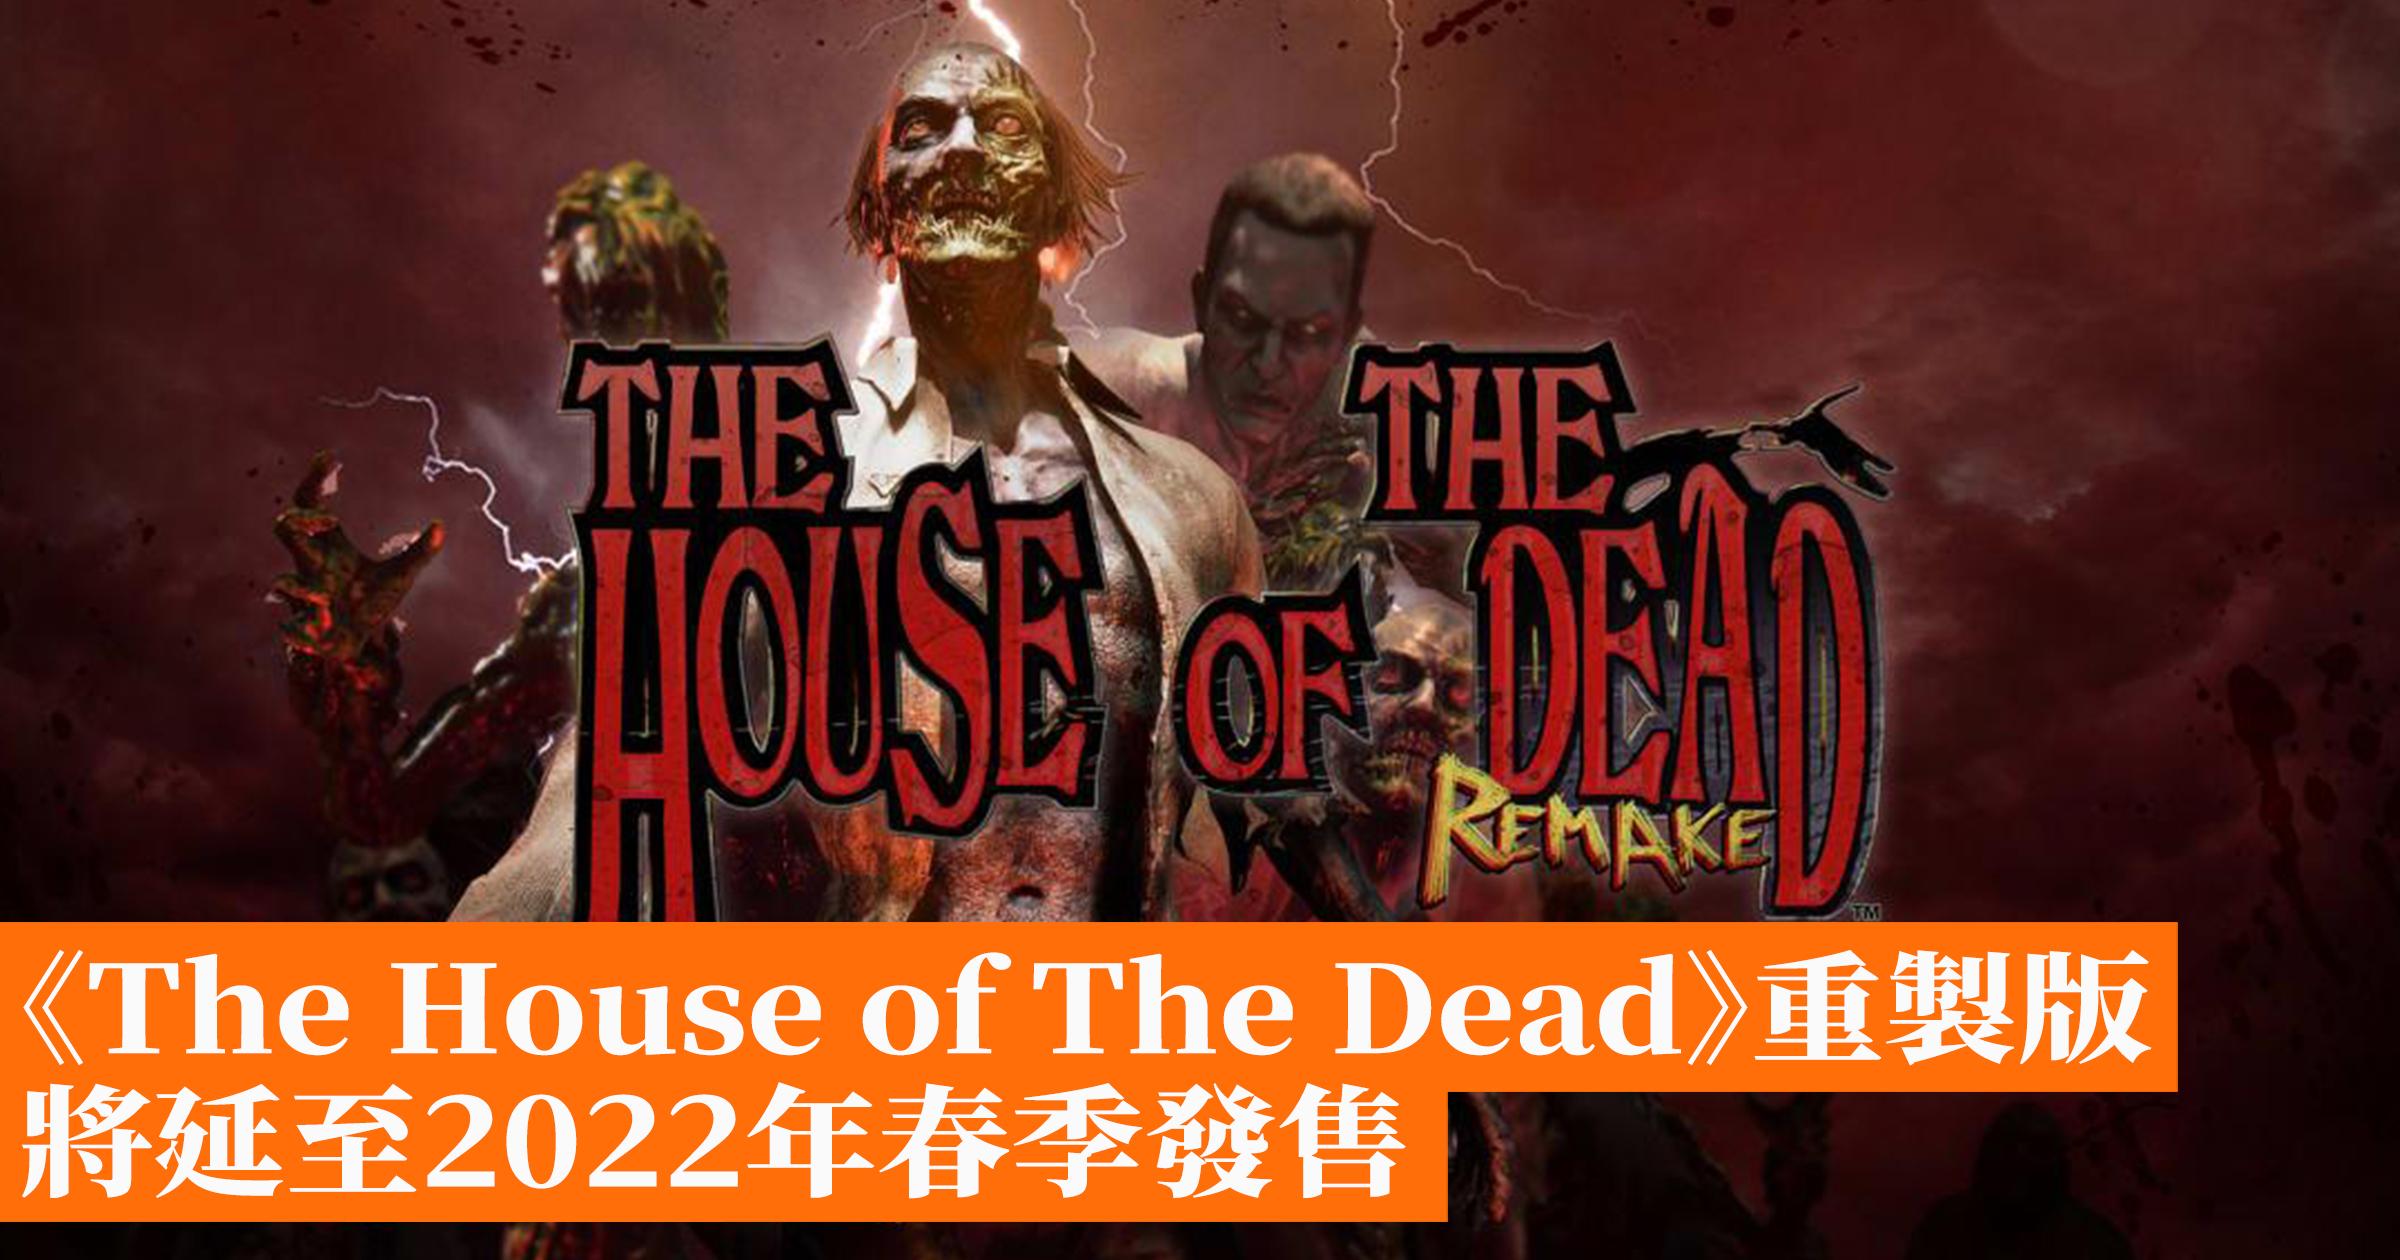 the-house-of-the-dead-2022-gameapps-hk